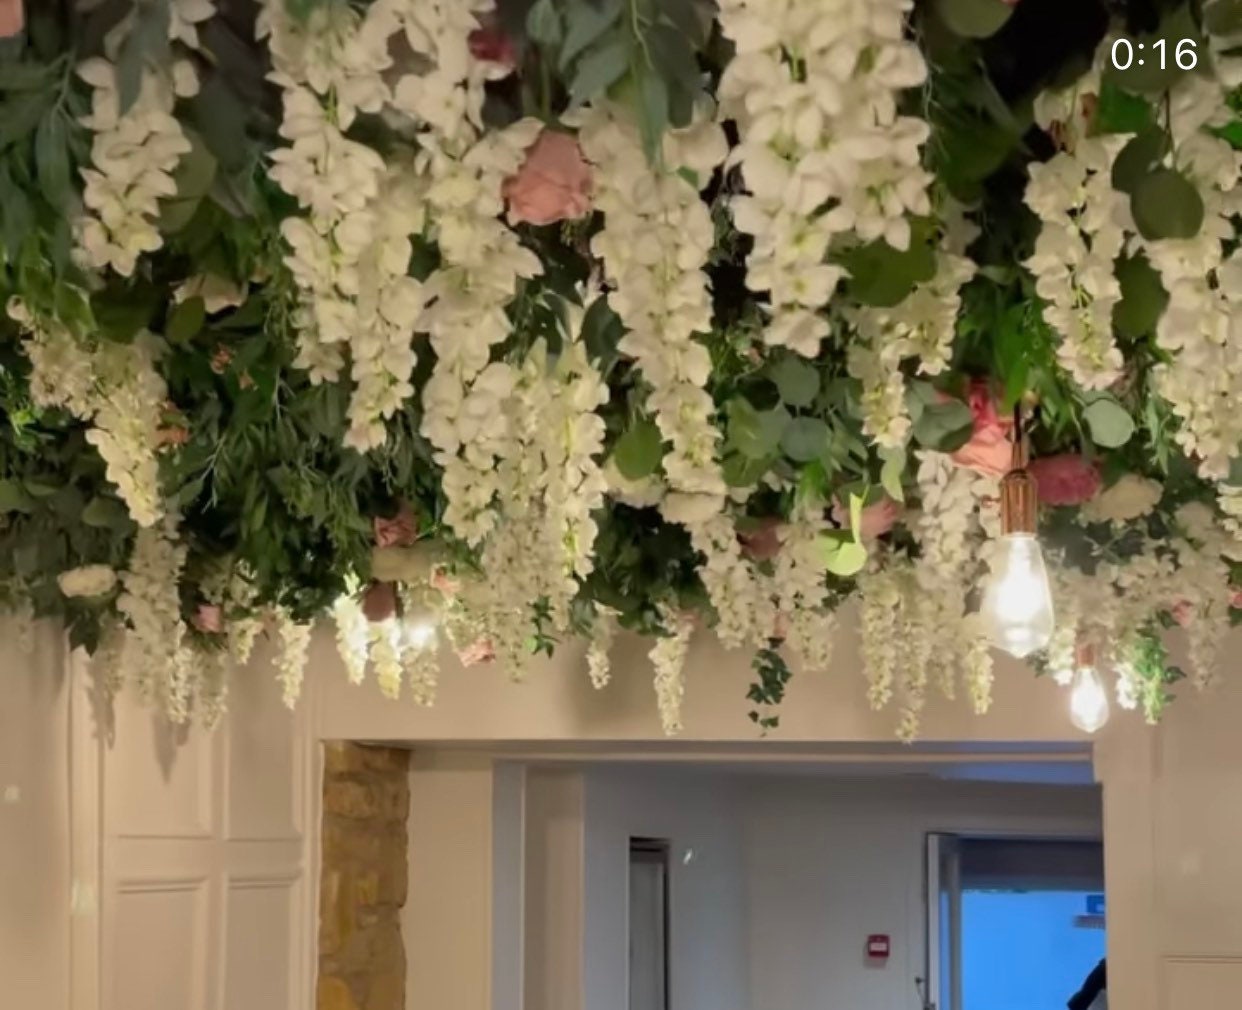 Wisteria Flower Ceiling Wall, Wall Ceiling, Wisteria Flower Wall, Trailing Restaurant Ceiling